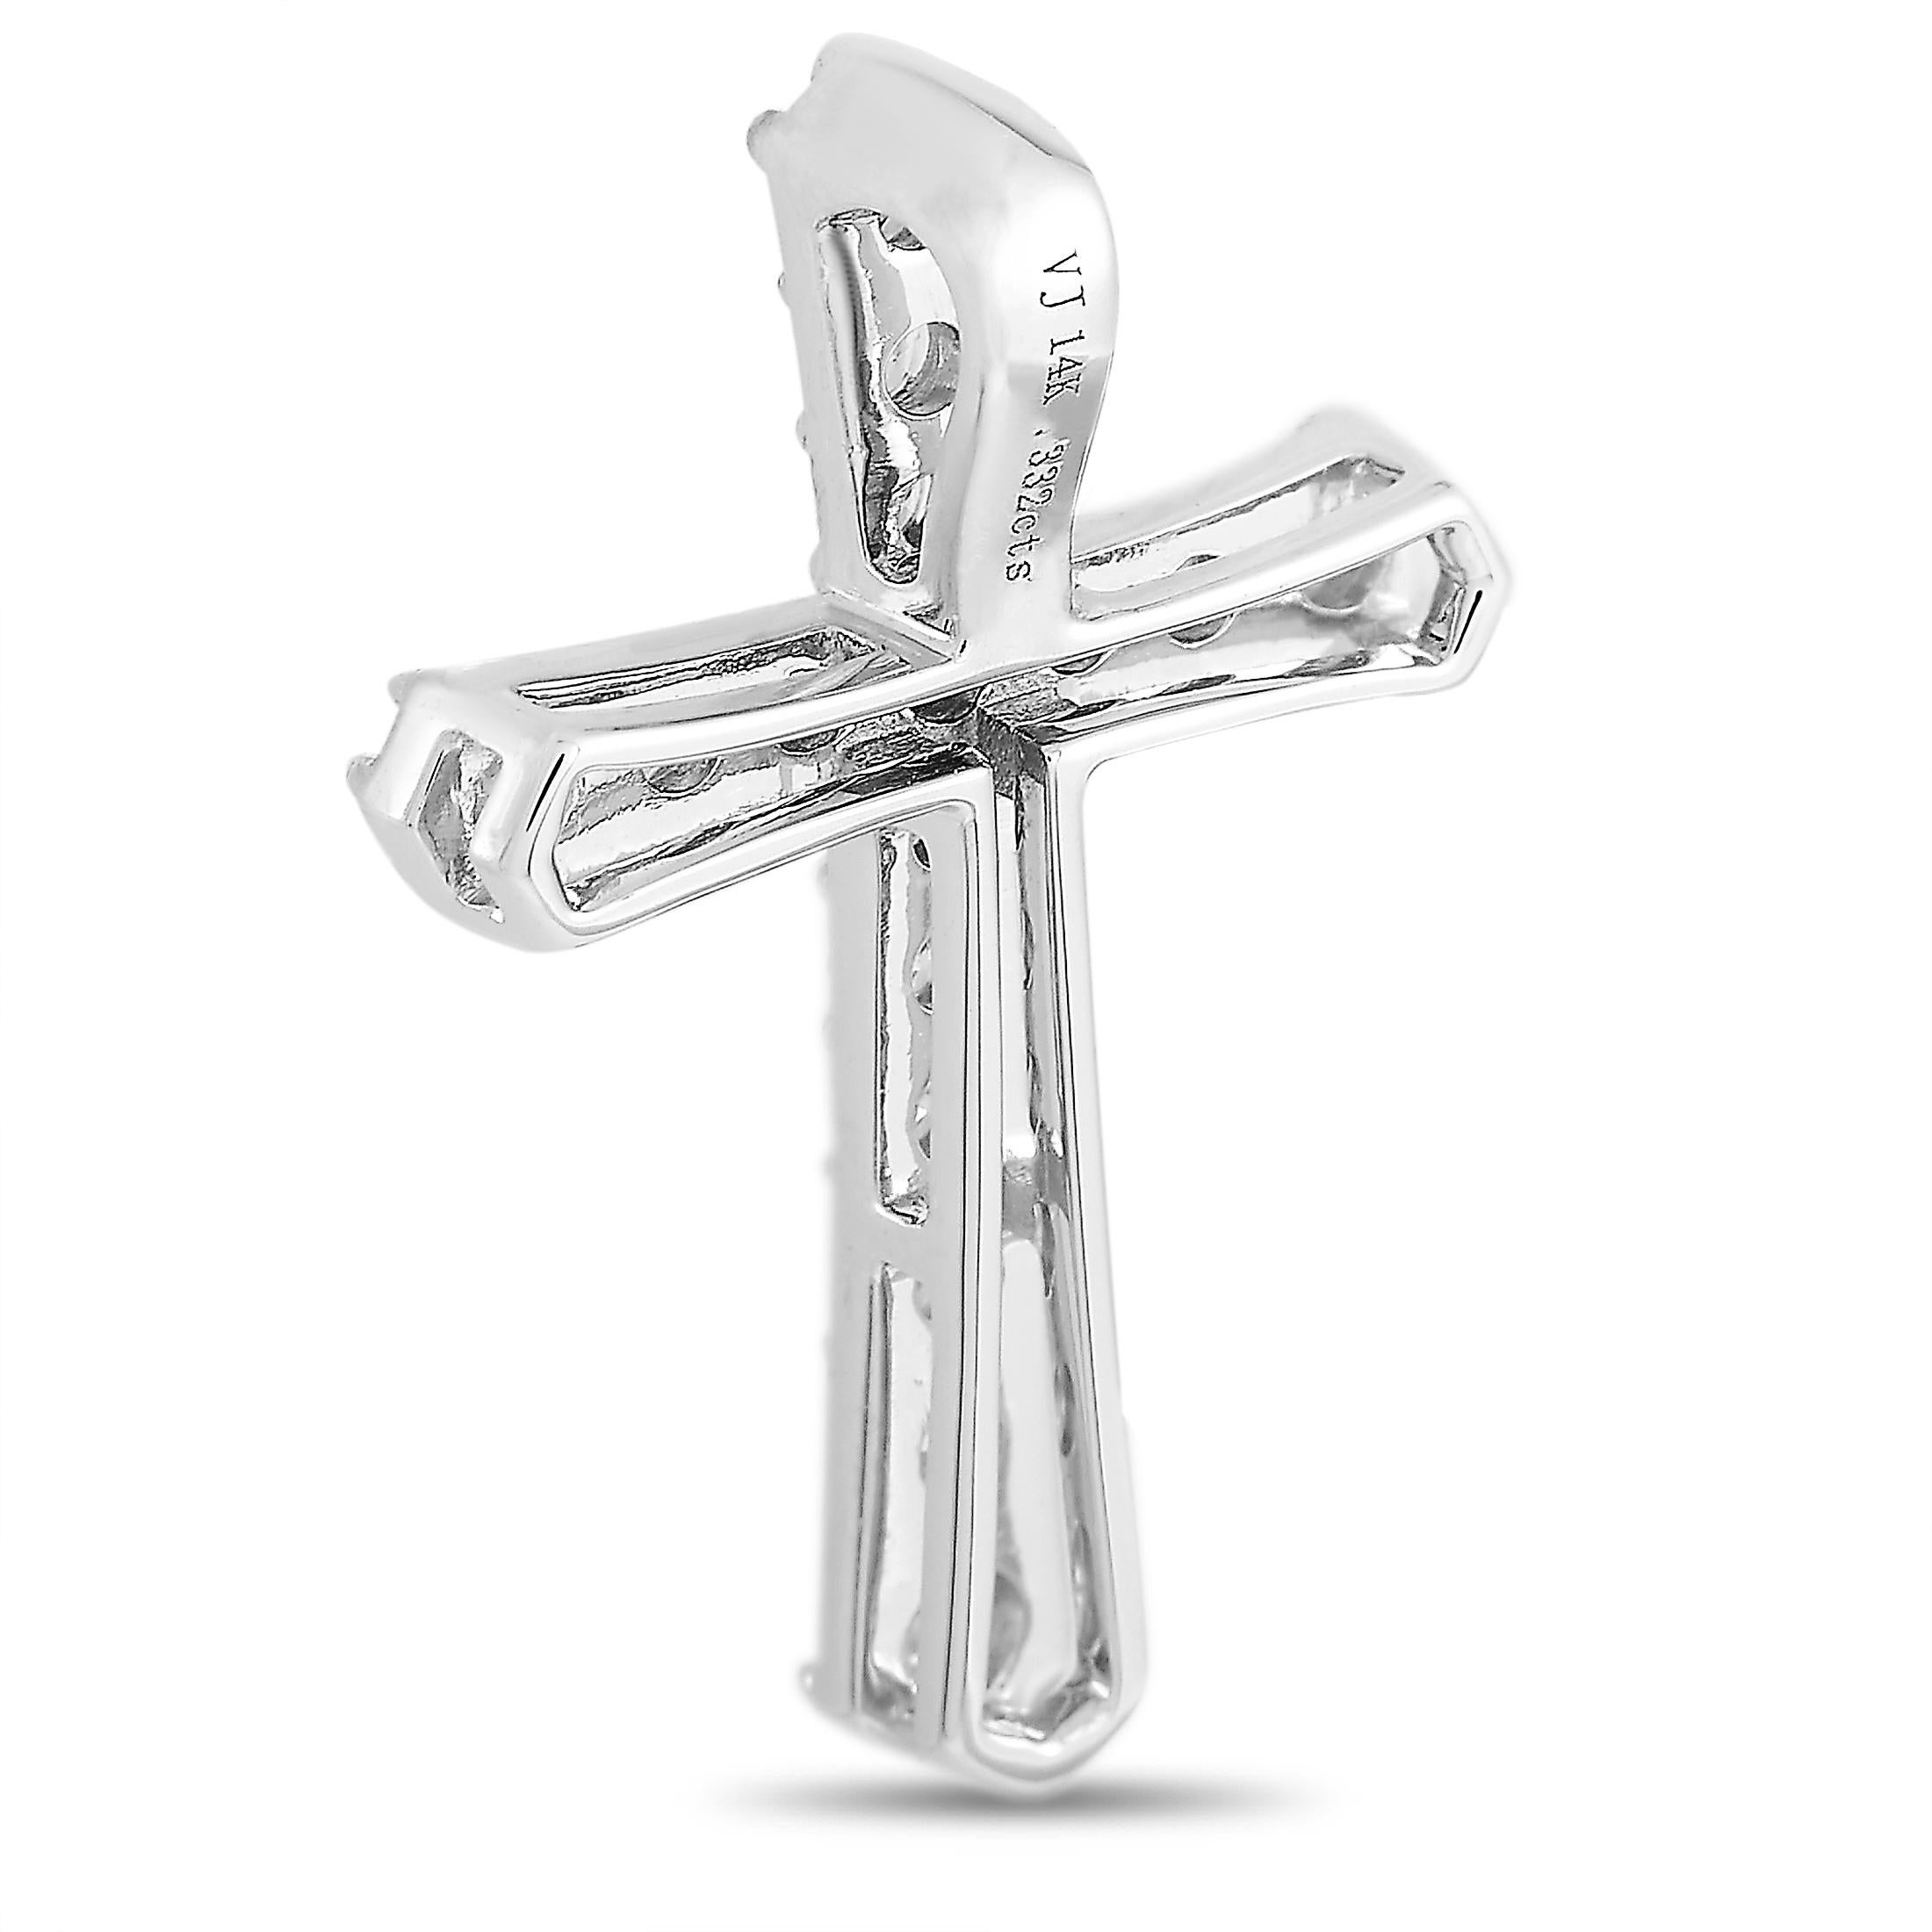 This LB Exclusive cross pendant is crafted from 14K white gold and set with diamonds that total 0.32 carats. The pendant weighs 1.3 grams and measures 0.88” in length and 0.55” in width.
 
 Offered in brand new condition, this item includes a gift